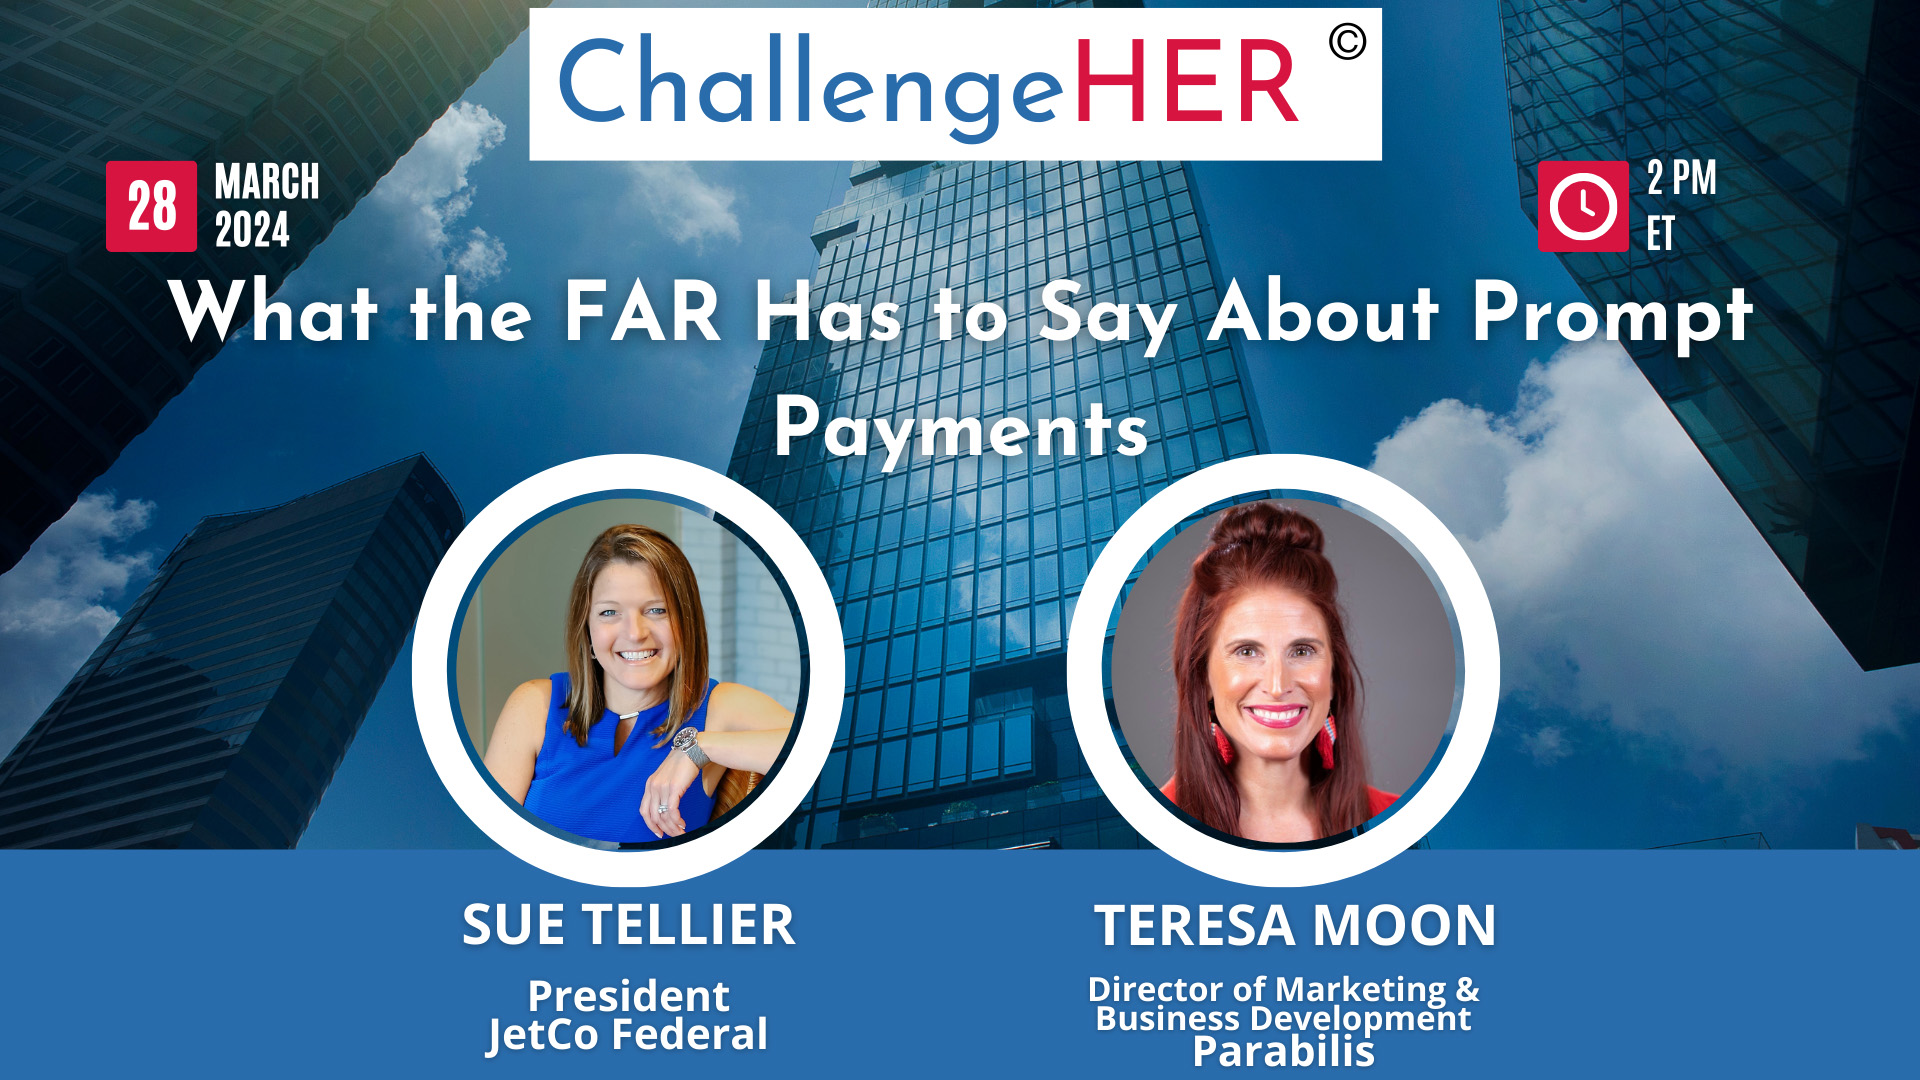 ChallengeHER Prompt Payments webinar featuring Sue Tellier and Teresa Moon